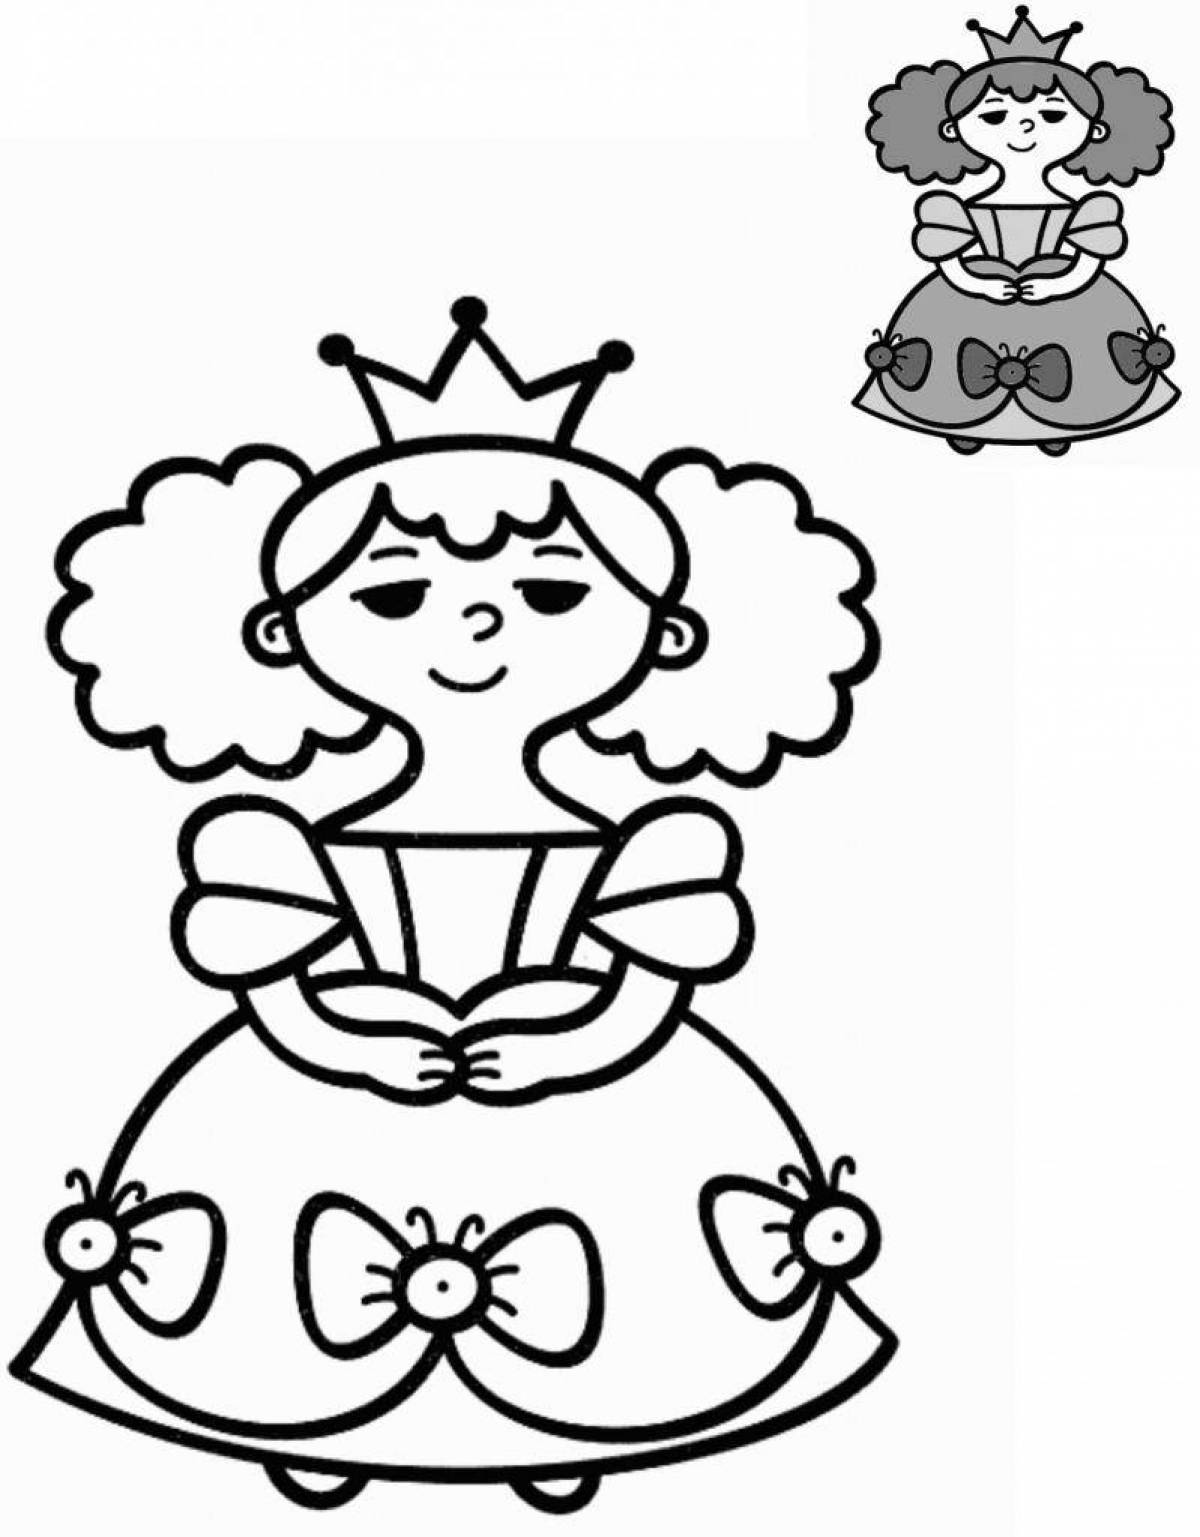 Bright coloring princess with a crown